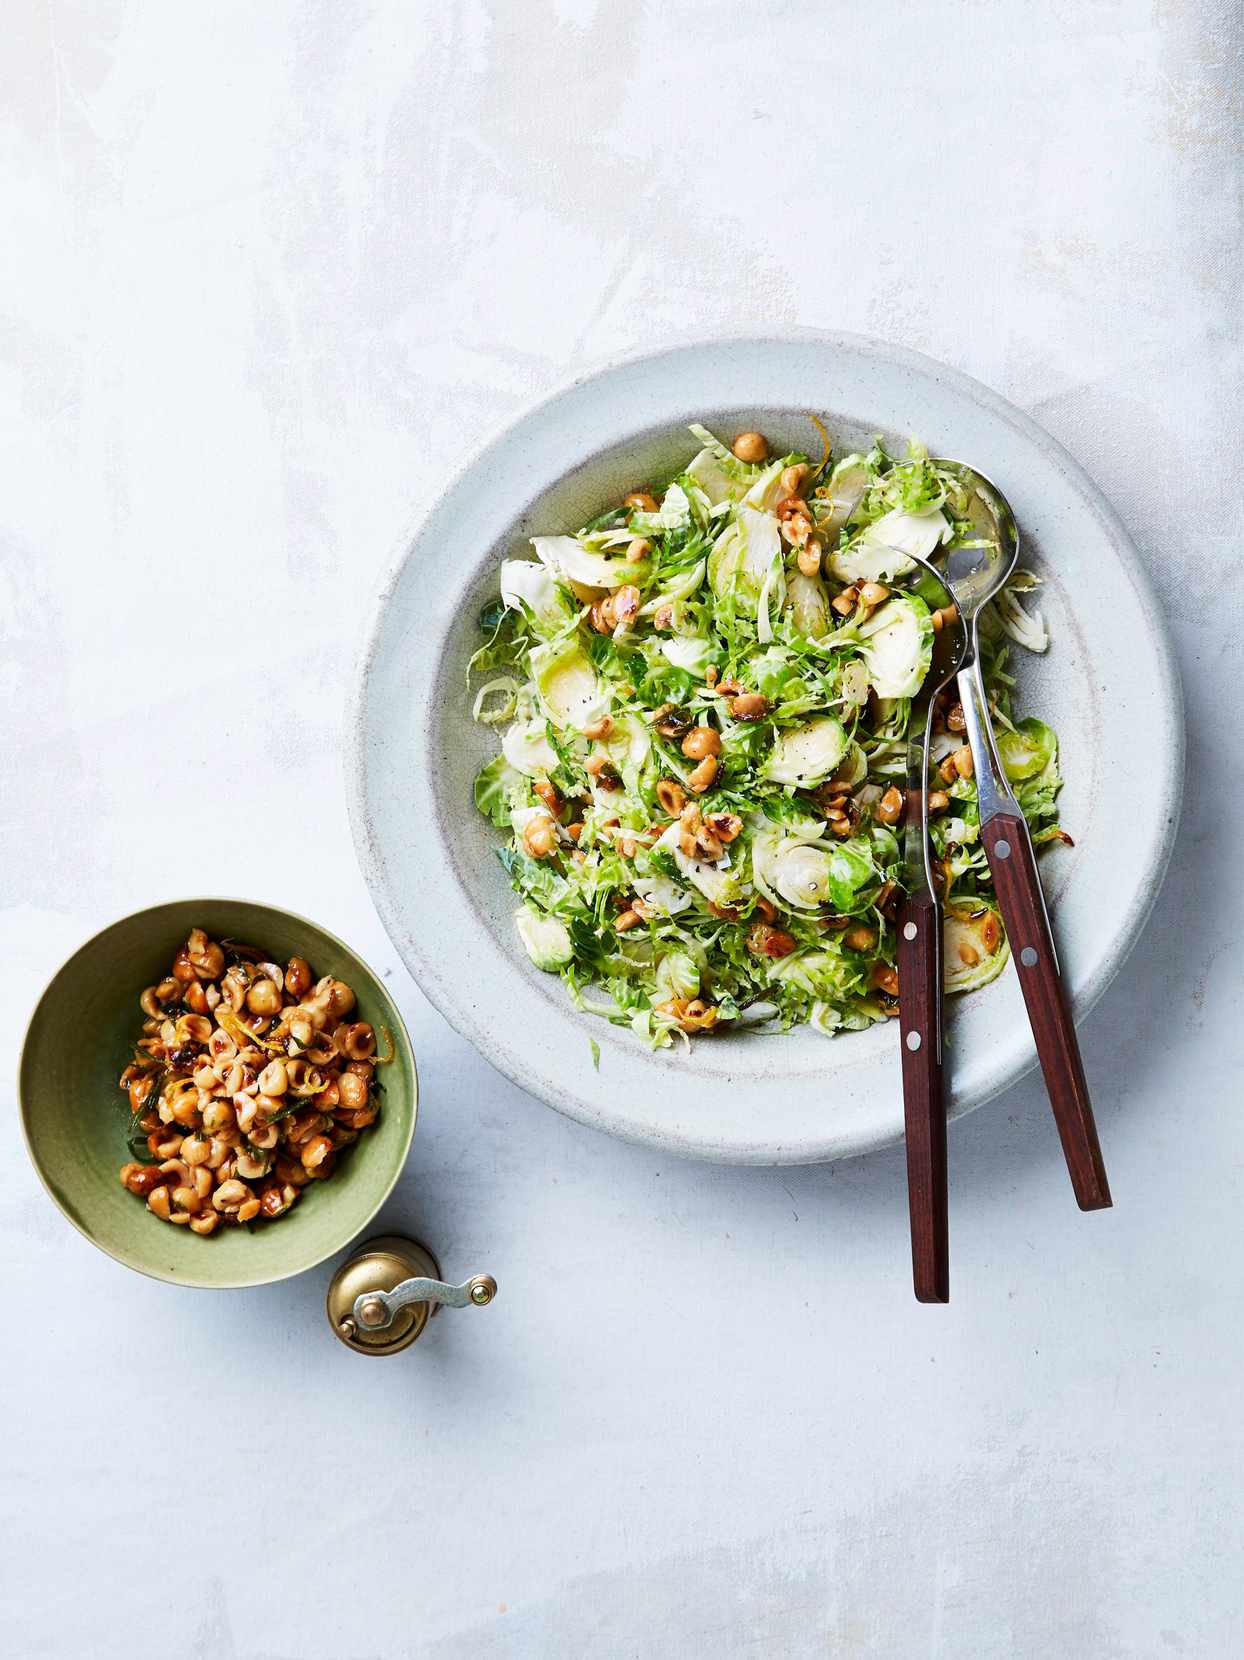 shredded brussels sprout salad with hazelnut crunch served in a white bowl